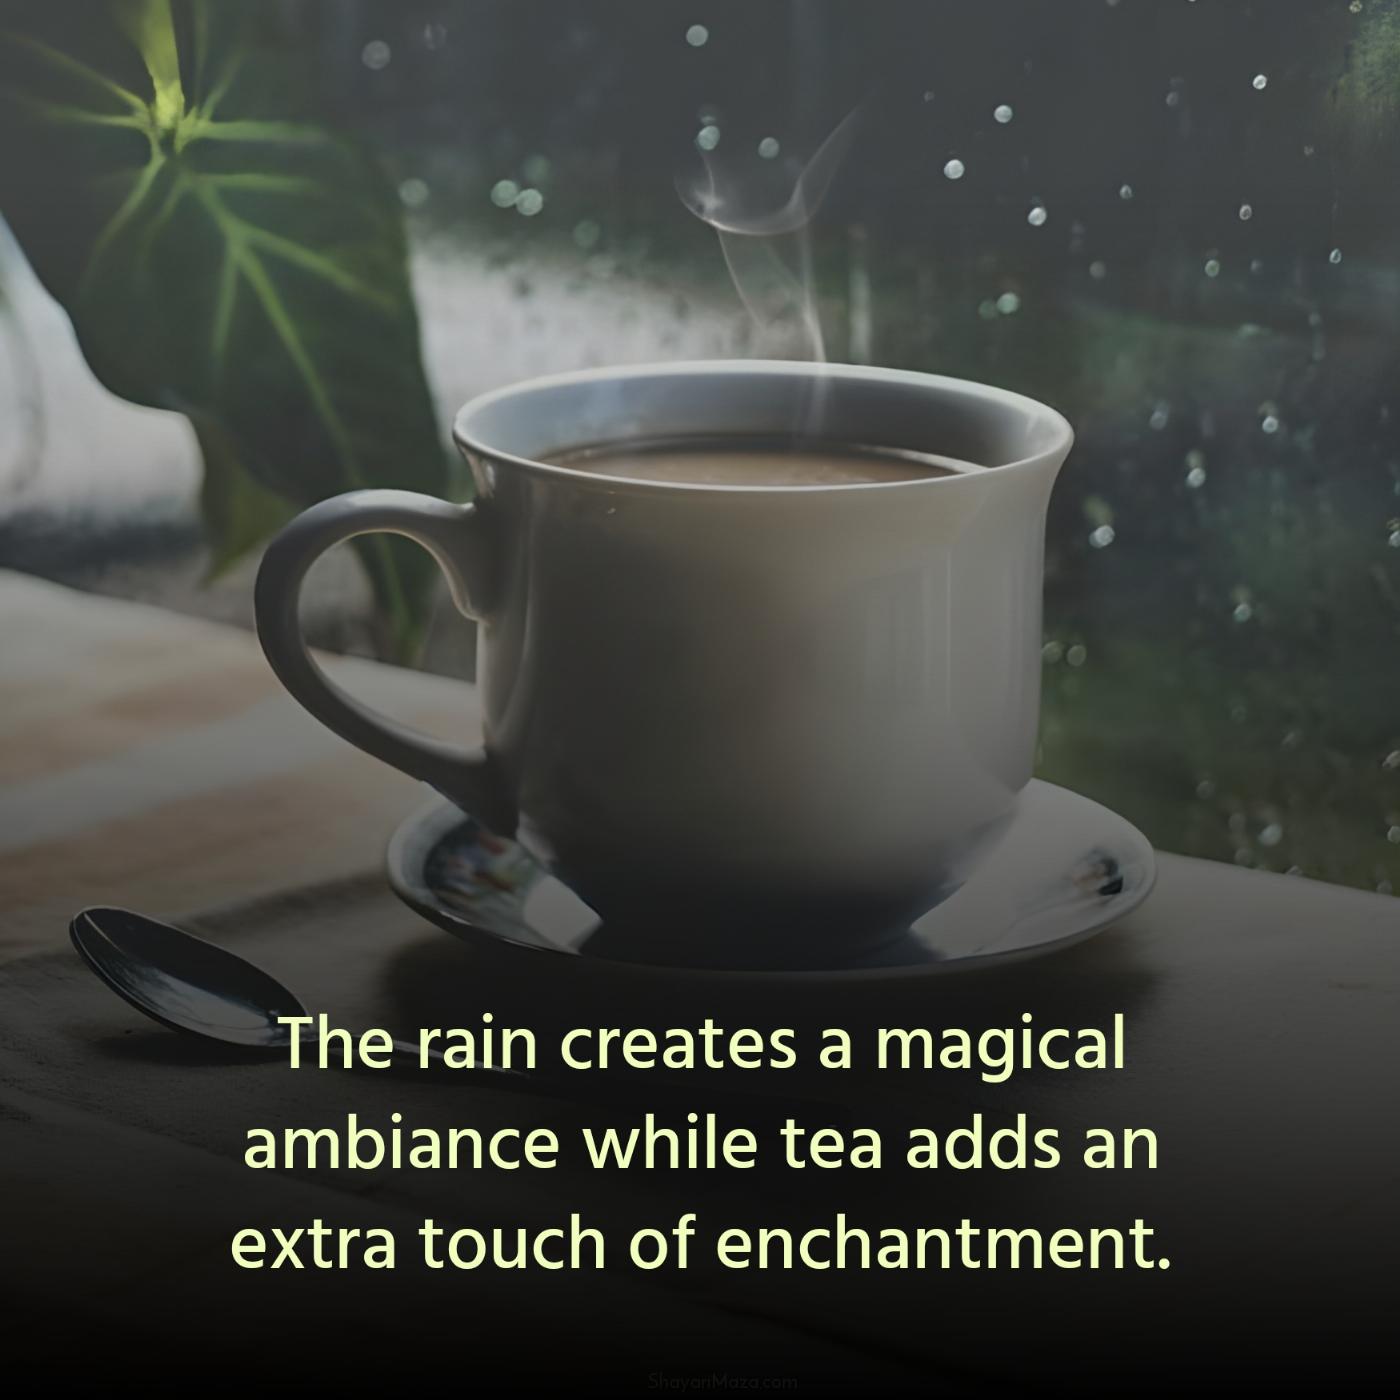 The rain creates a magical ambiance while tea adds an extra touch